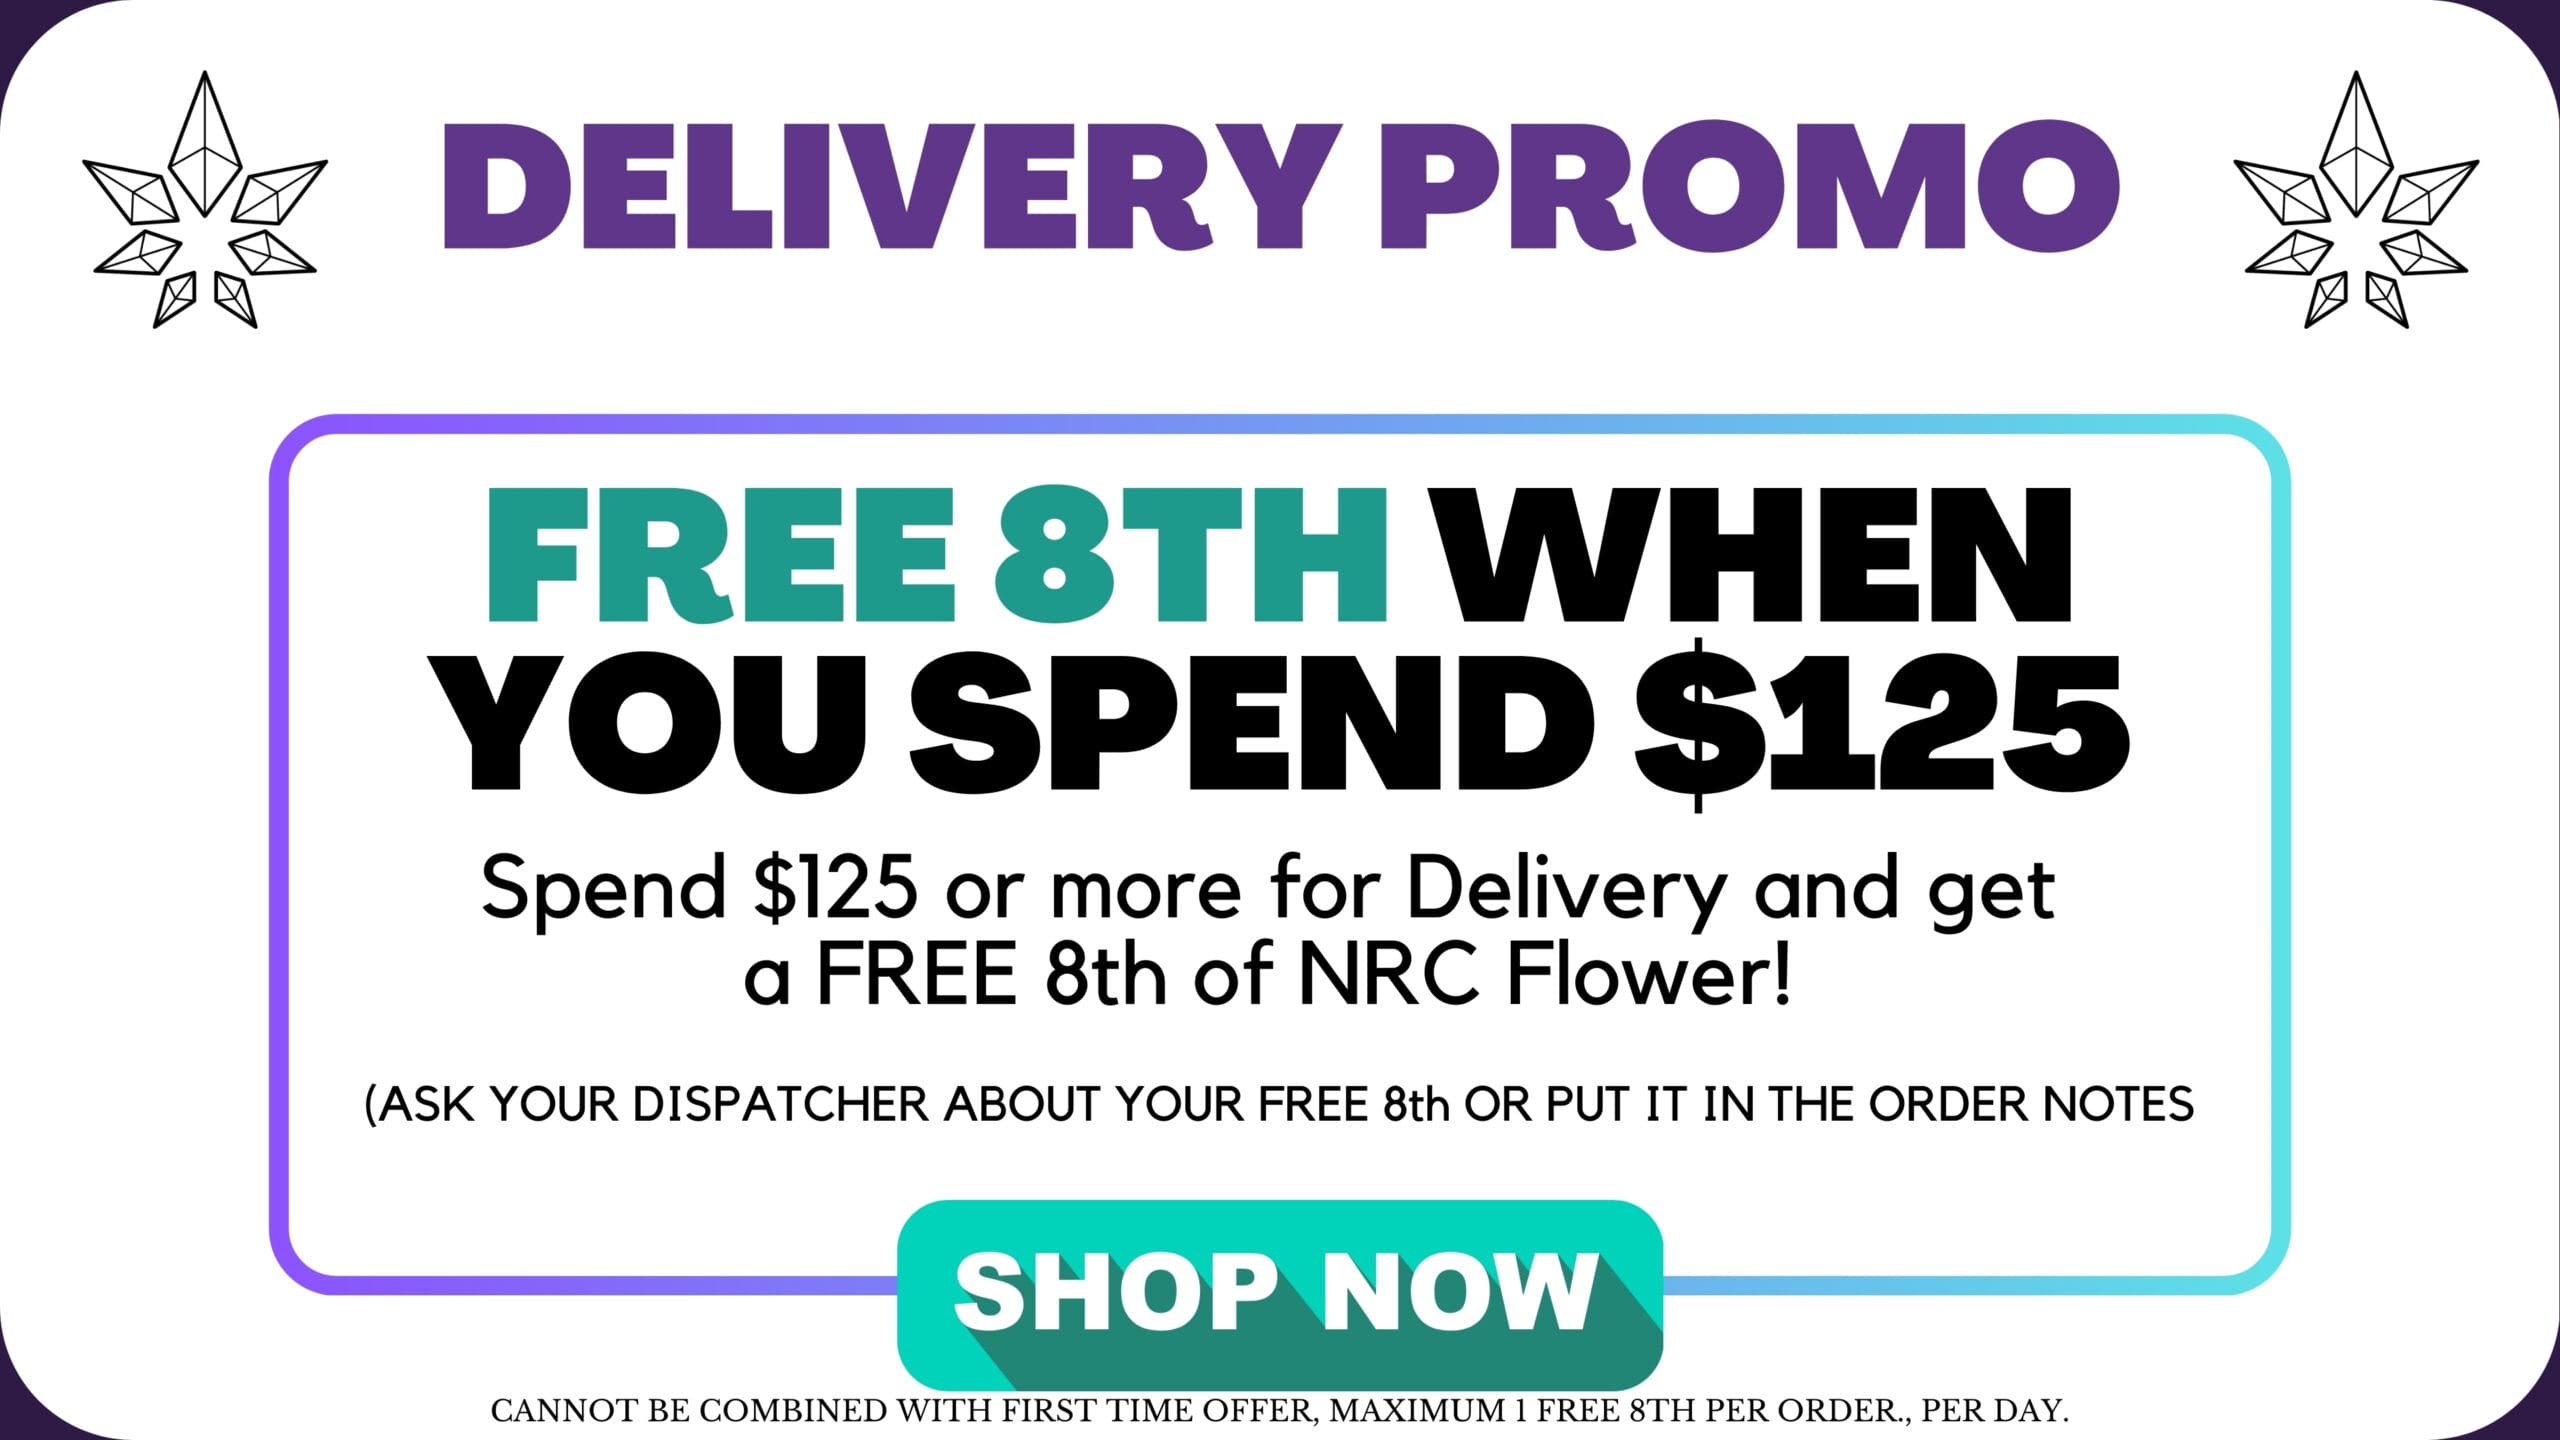 DELIVERY PROMO